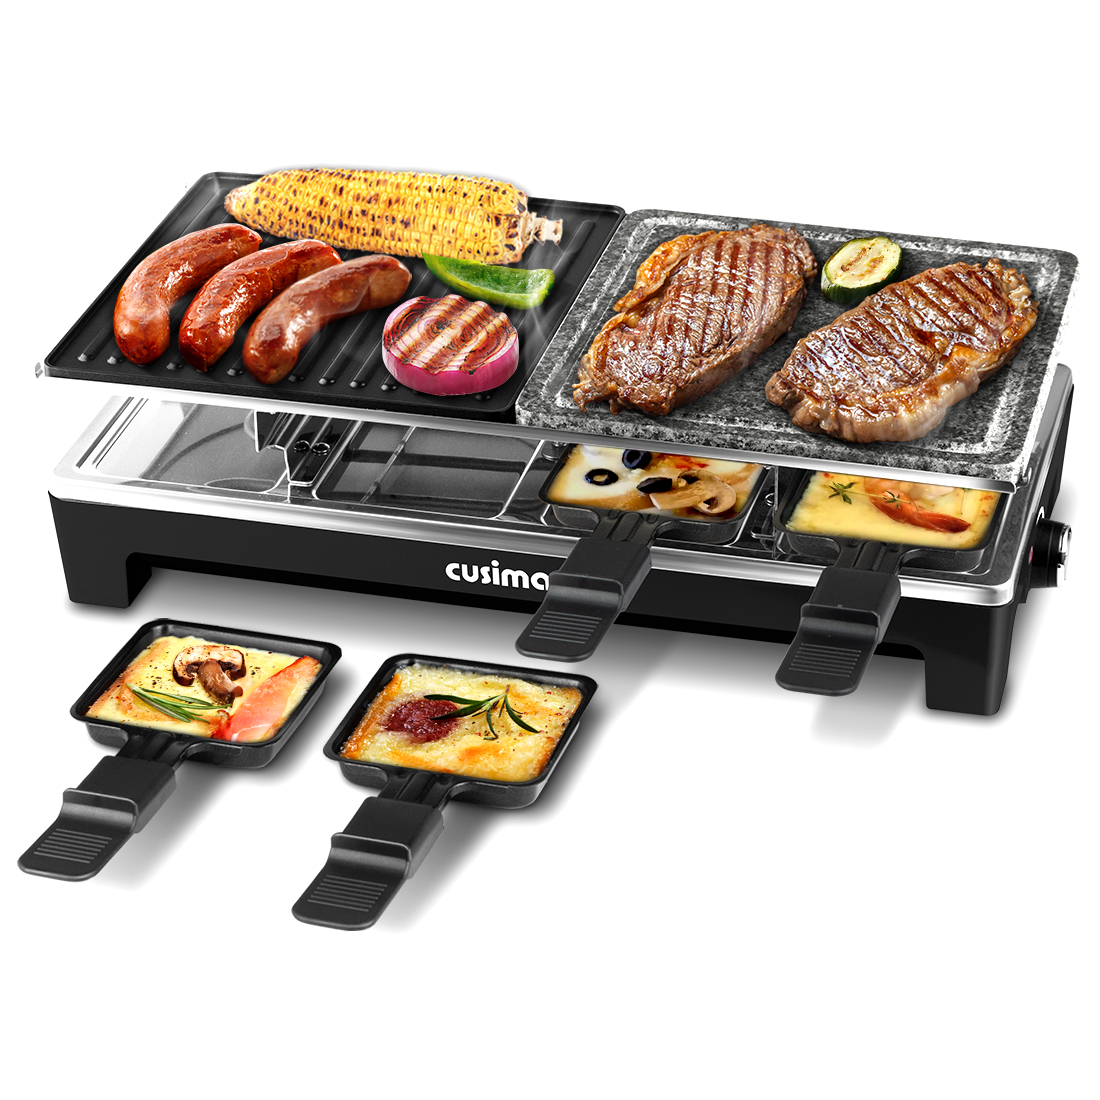 Kitchen Electric Raclette Grill for Home Party Indoor Use 1500W